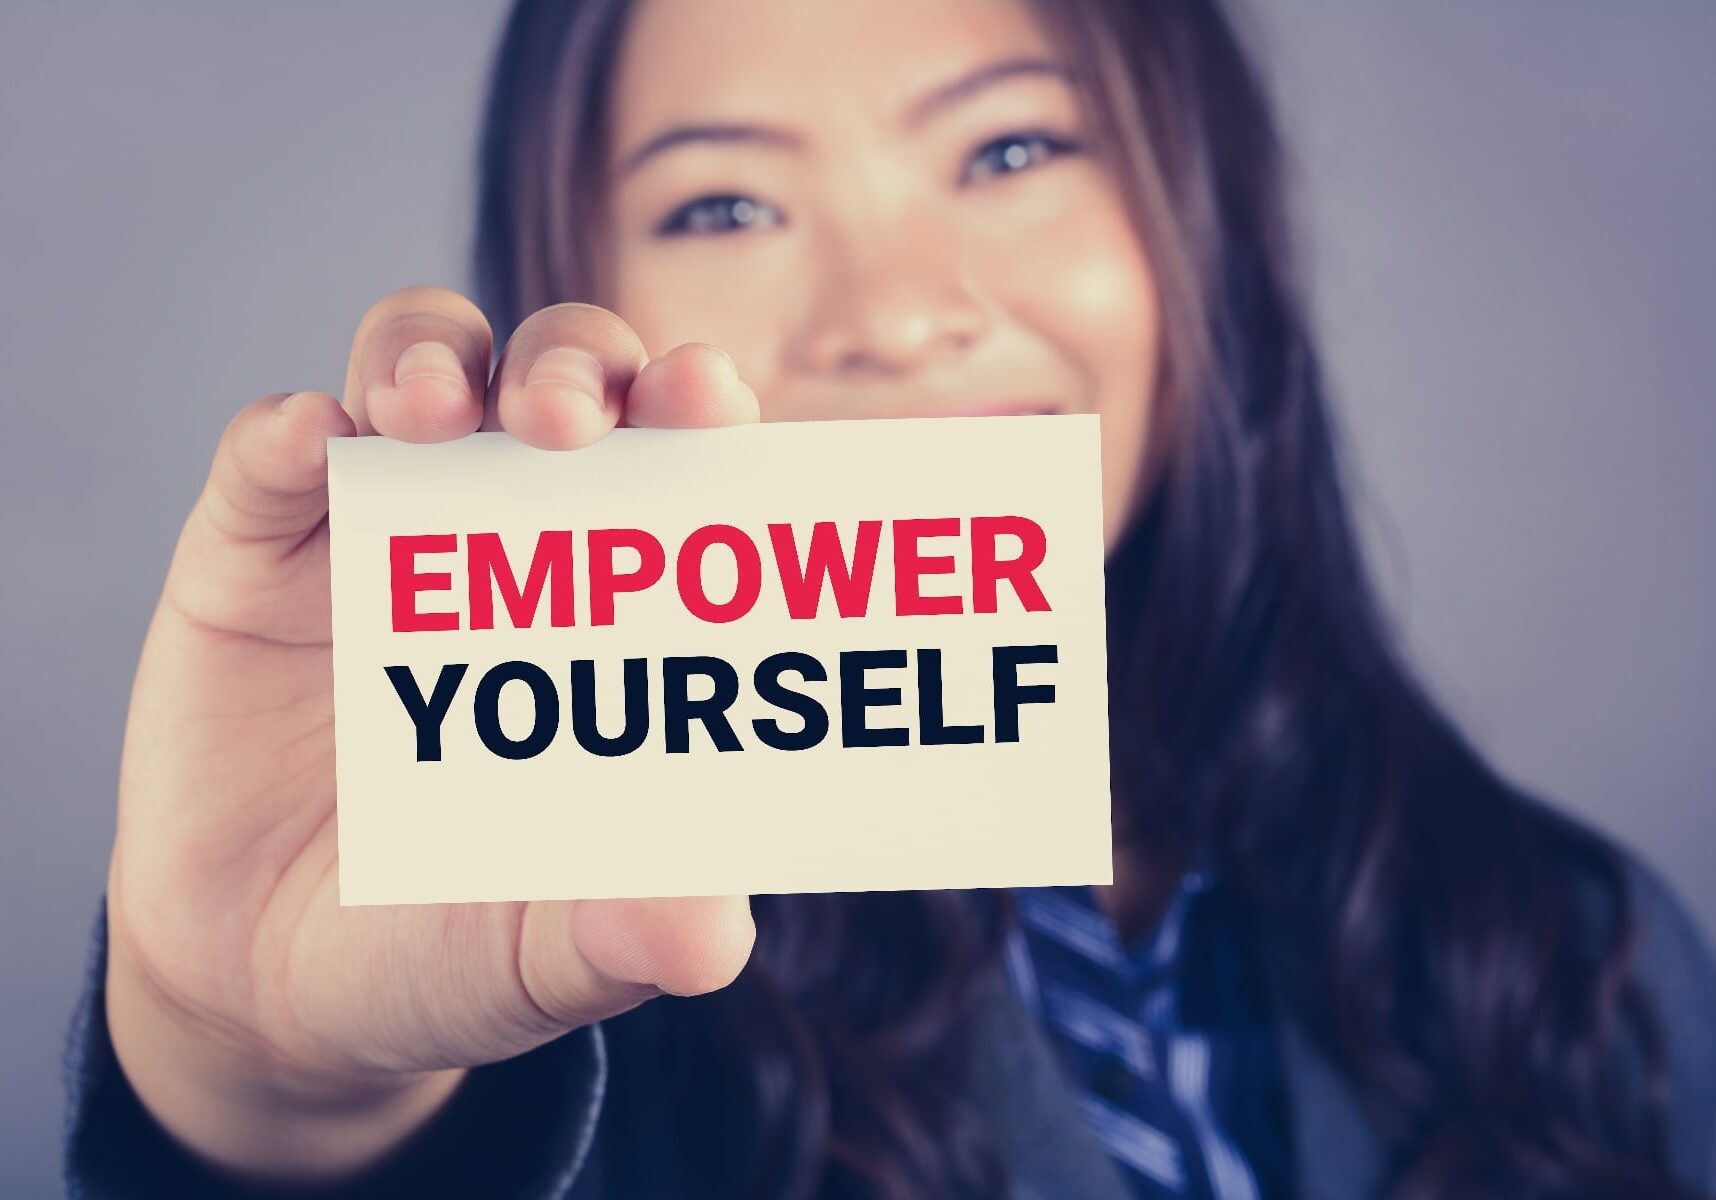 EMPOWER YOURSELF message on the card shown by a businesswoman, vintage tone effect